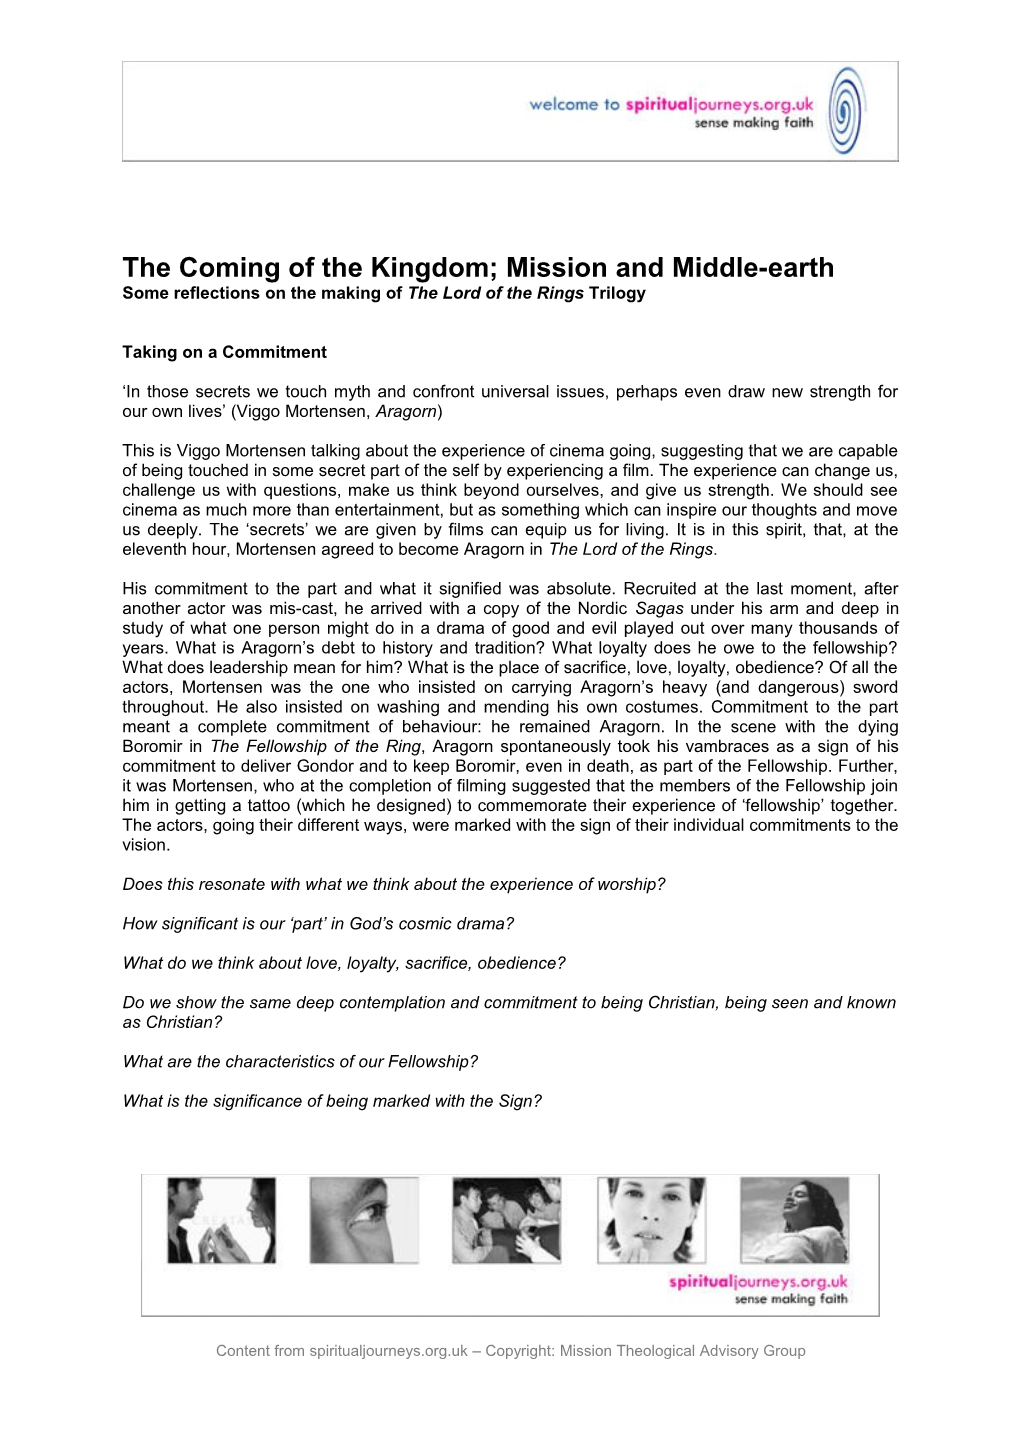 The Coming of the Kingdom; Mission and Middle-Earth